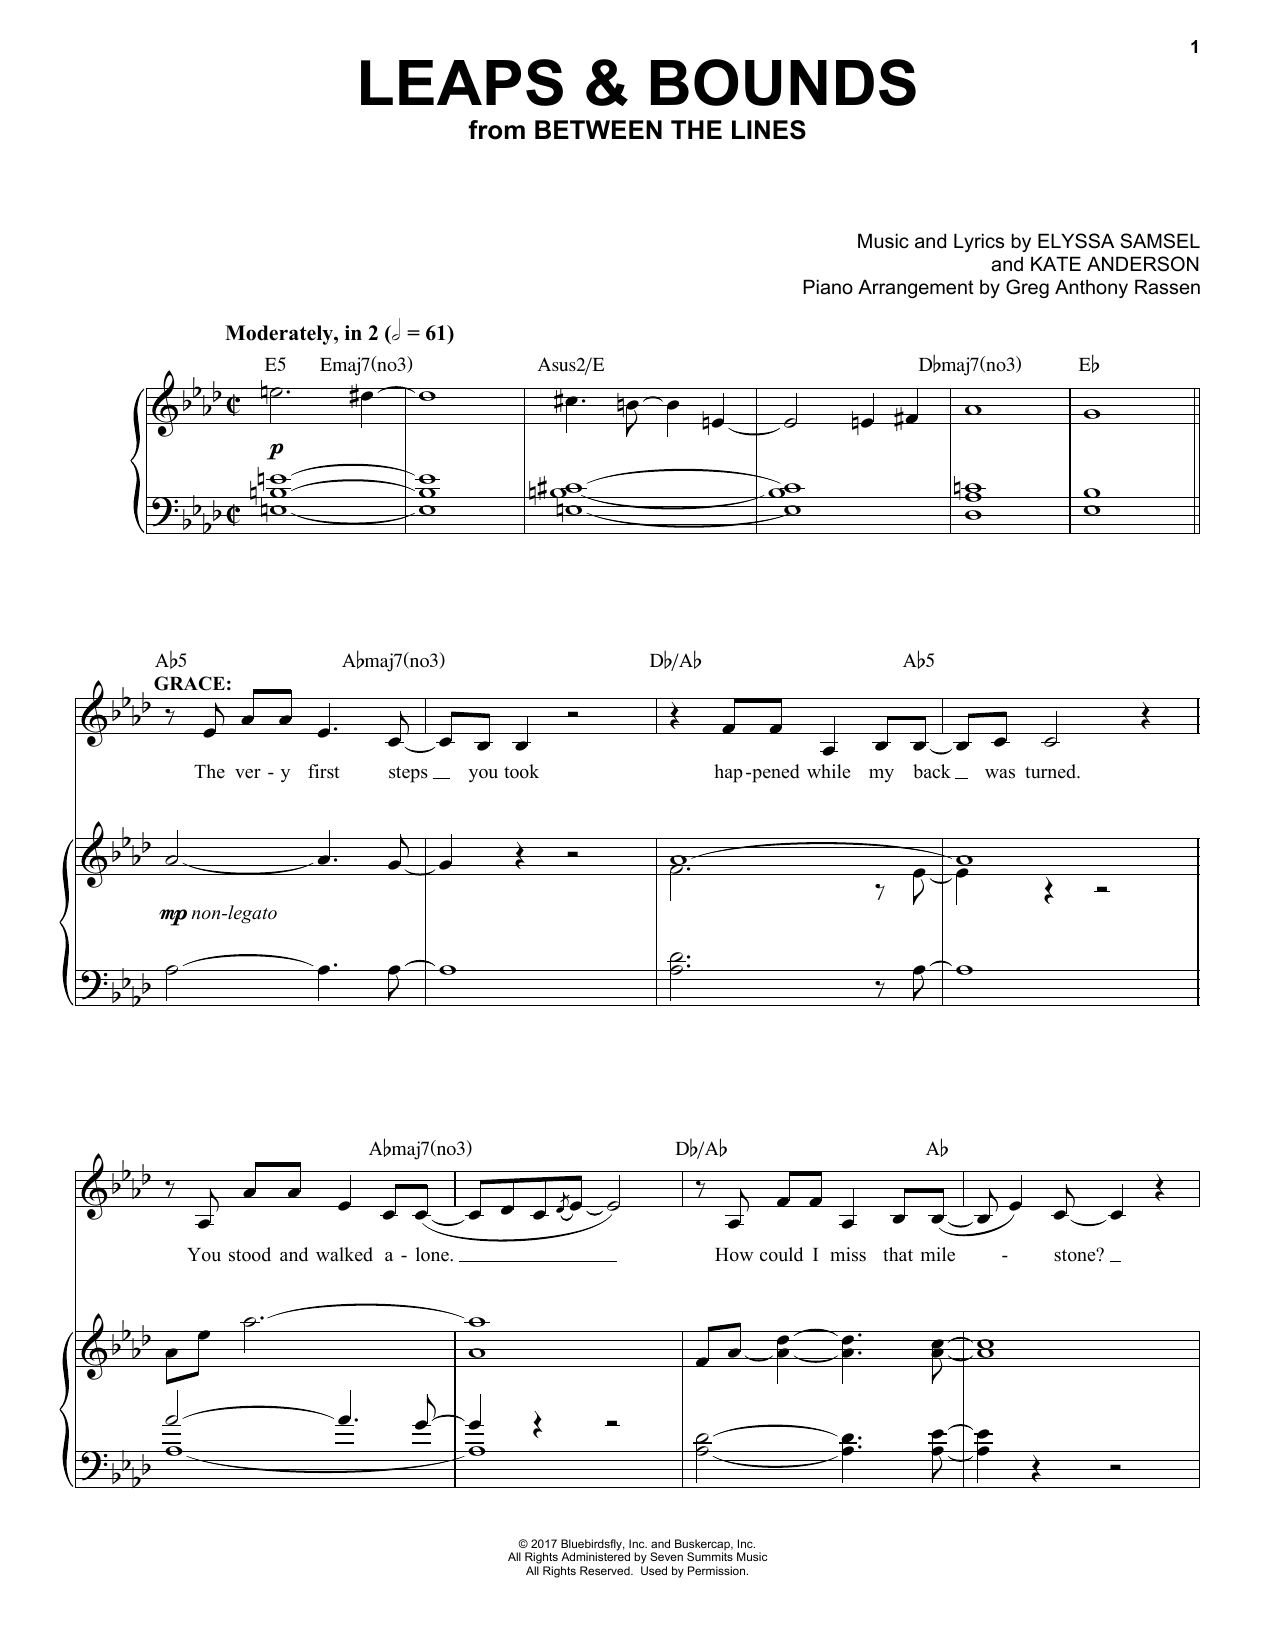 Download Elyssa Samsel & Kate Anderson Leaps & Bounds (from Between The Lines) Sheet Music